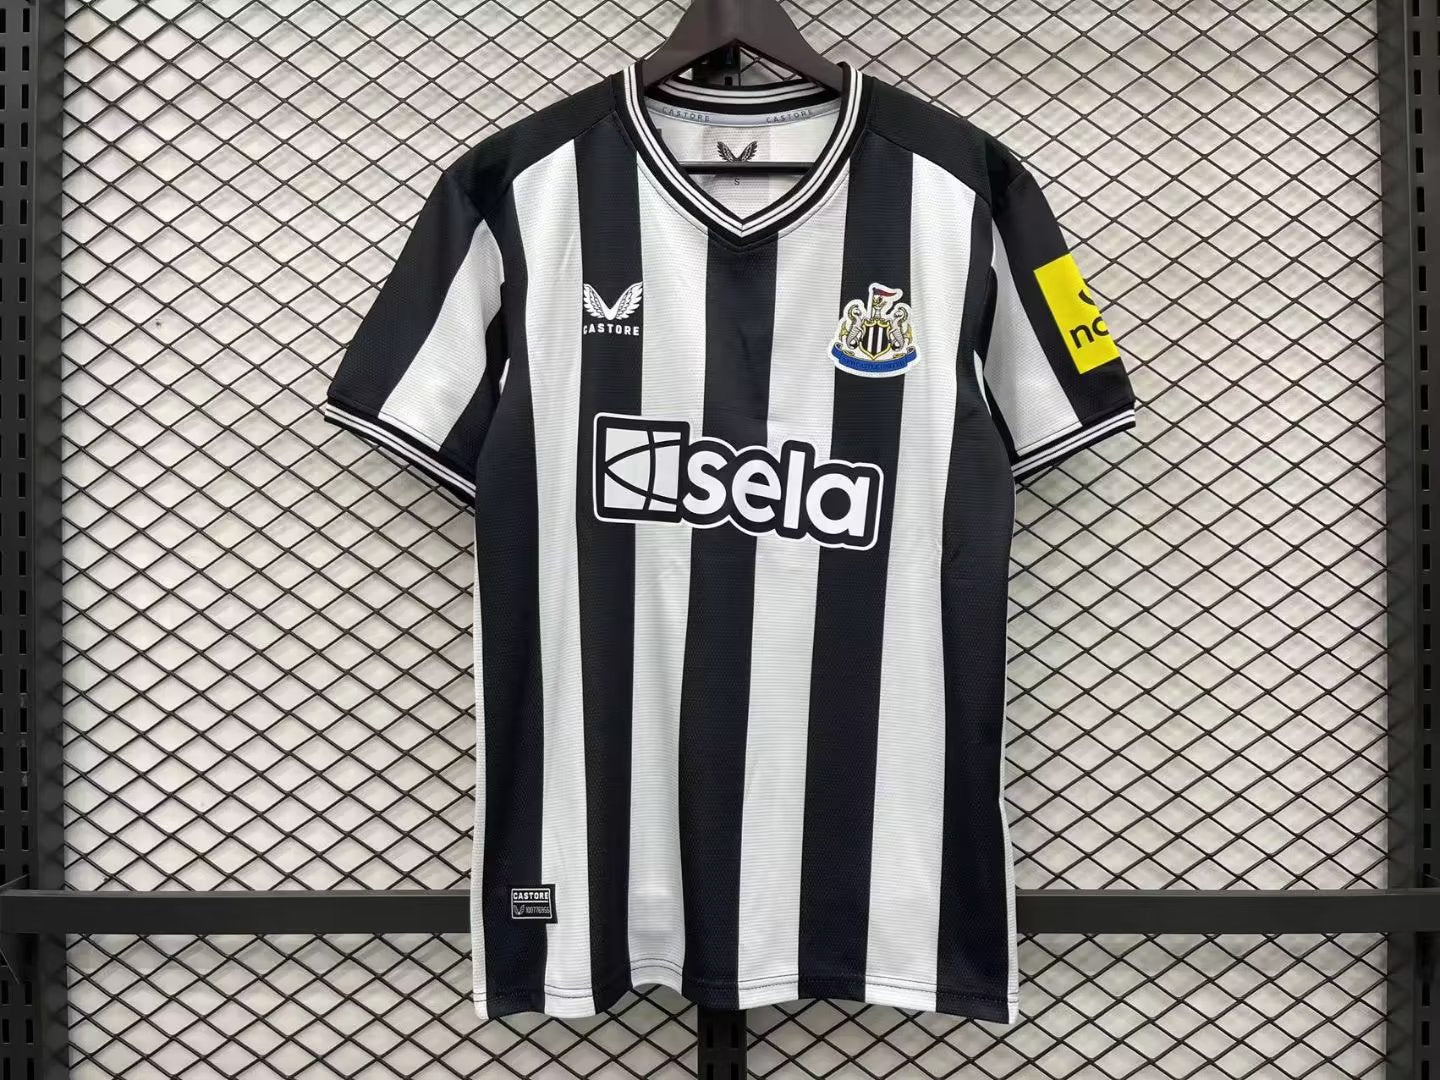 Newcastle 23/24 Home Kit – Fan version – The Football Heritage